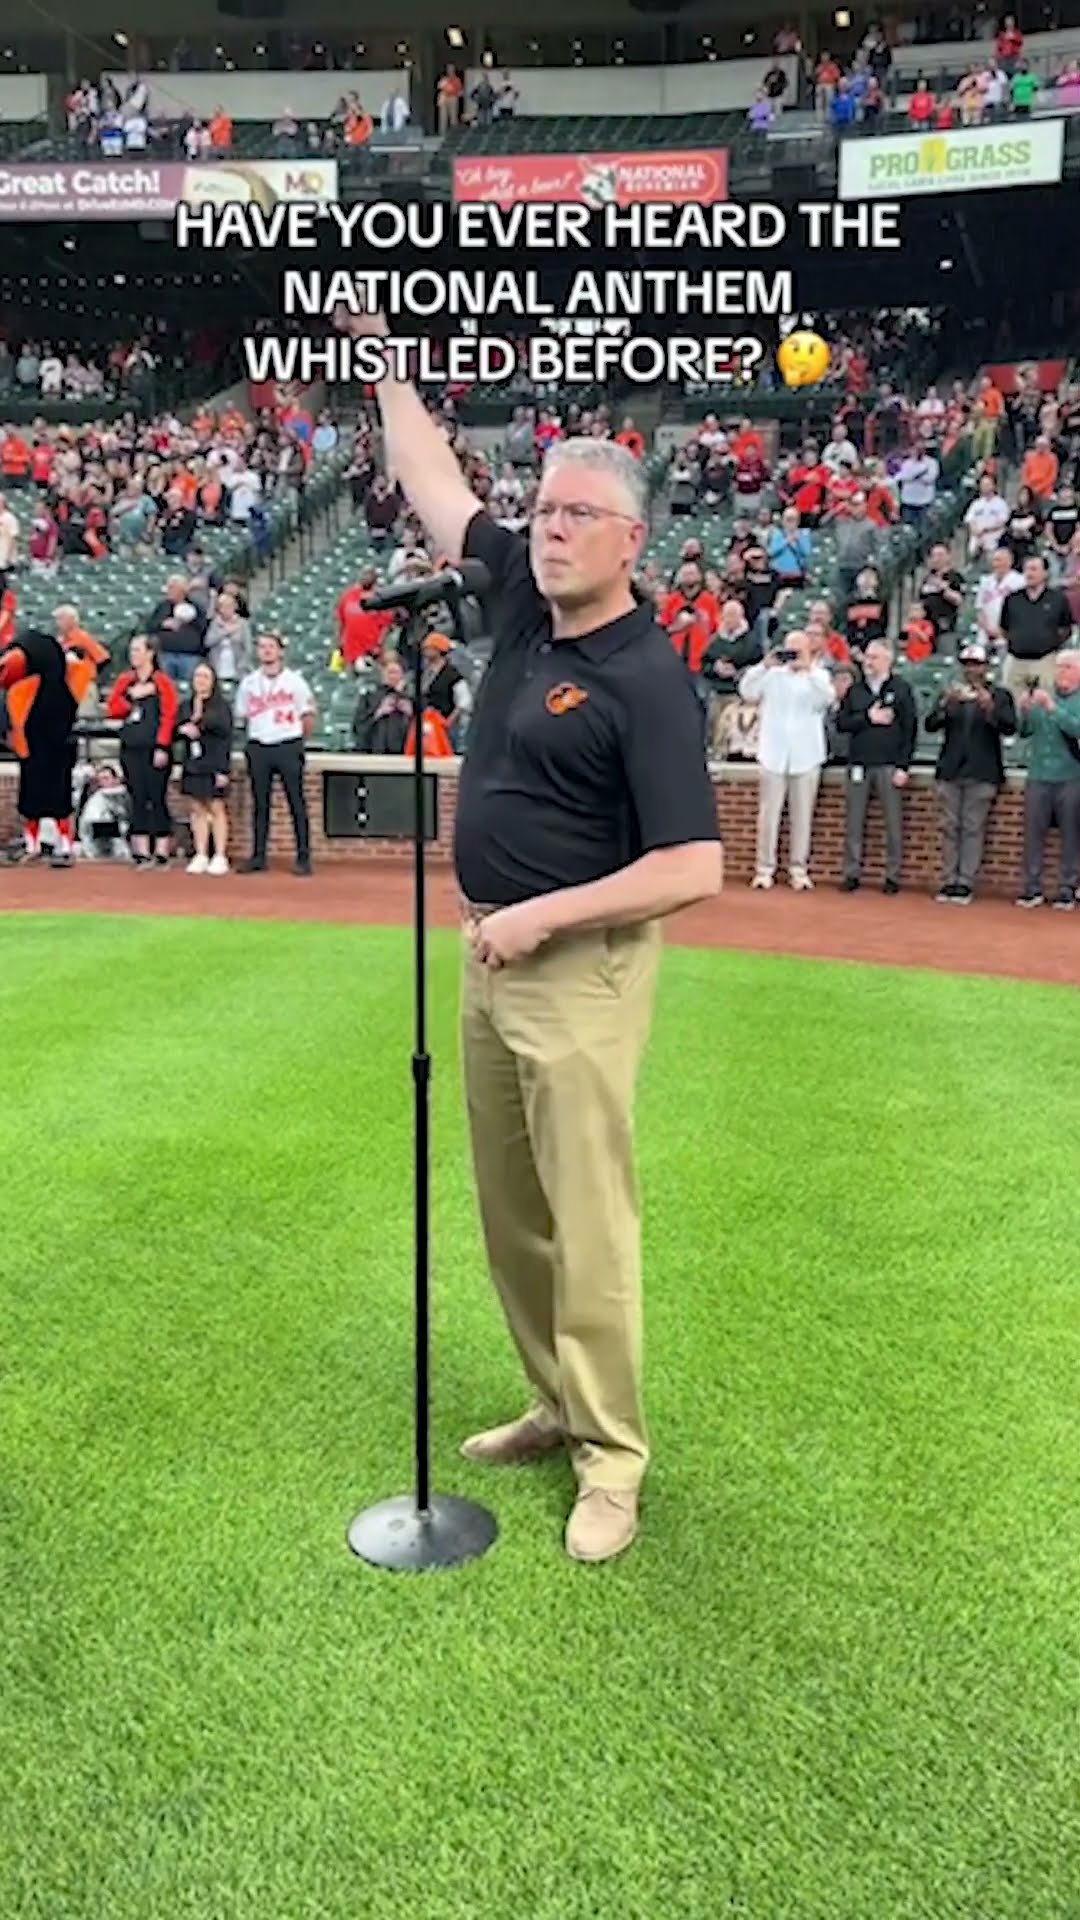 Man whistles the National Anthem at Baltimore Orioles game